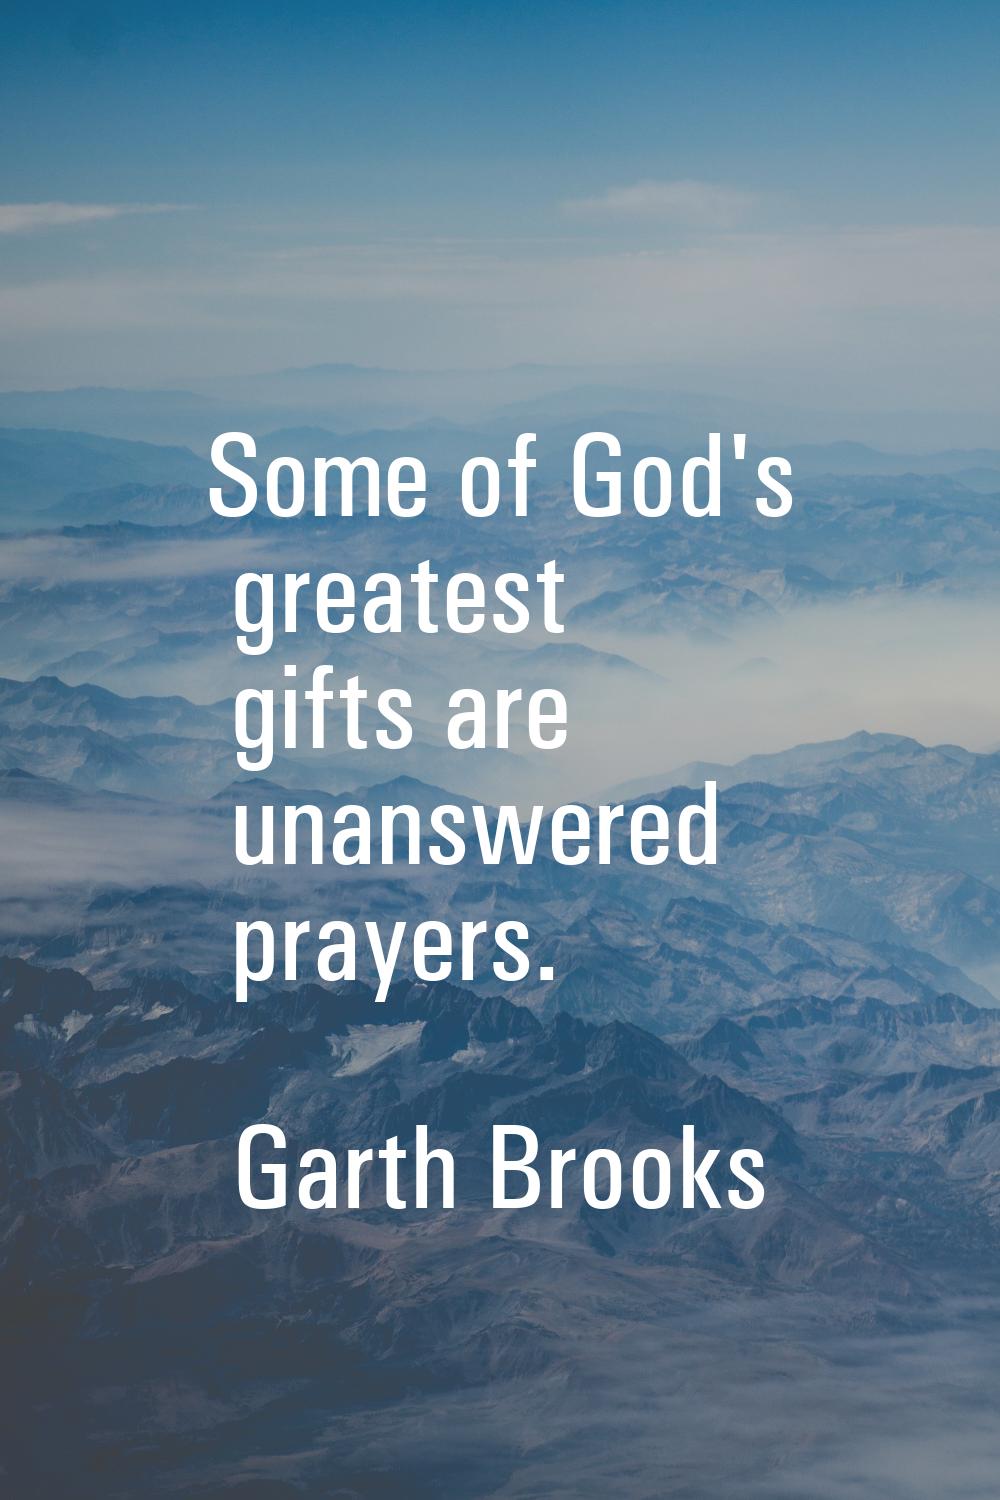 Some of God's greatest gifts are unanswered prayers.